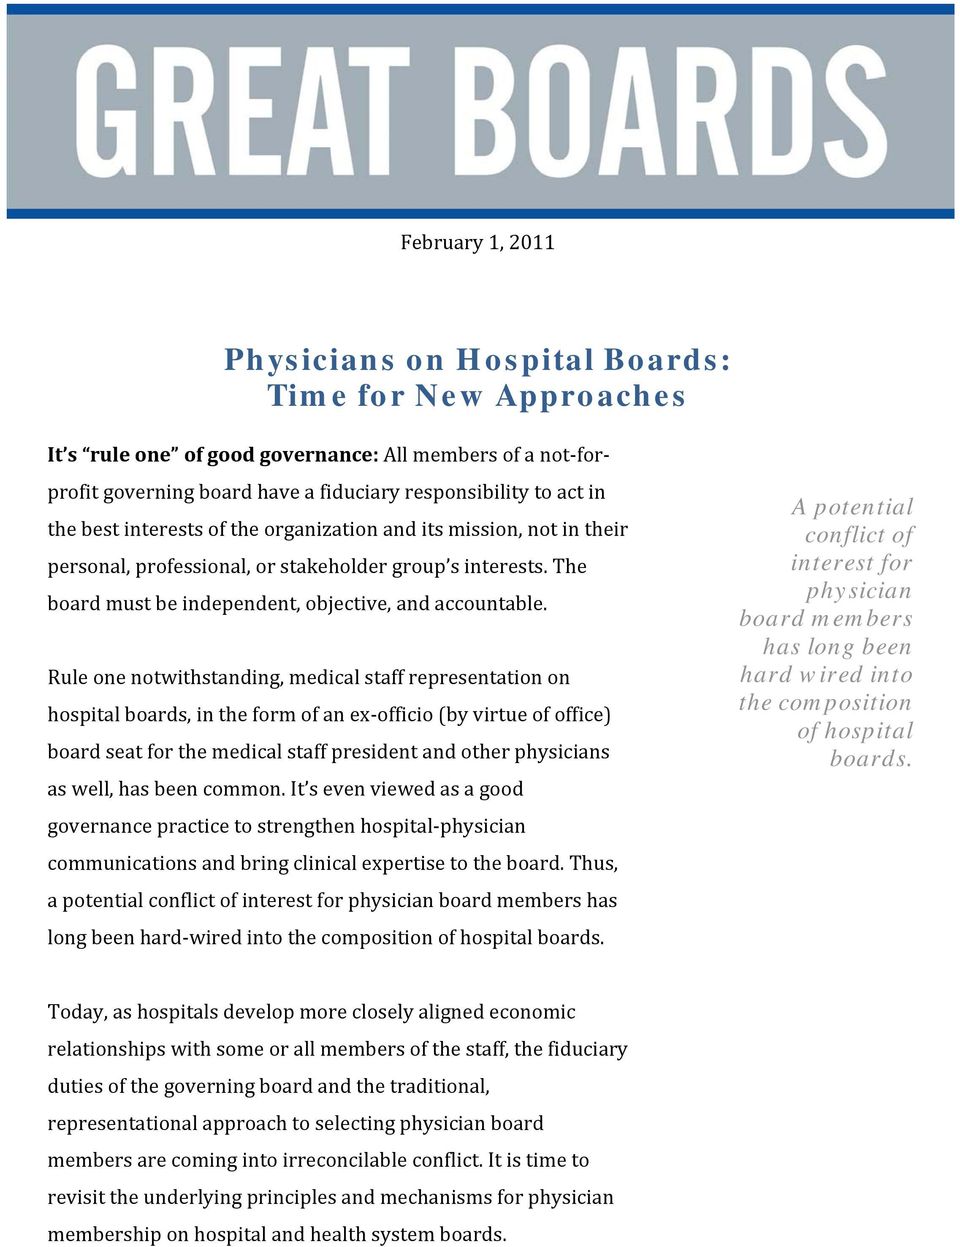 Rule one notwithstanding, medical staff representation on hospital boards, in the form of an ex officio (by virtue of office) board seat for the medical staff president and other physicians as well,